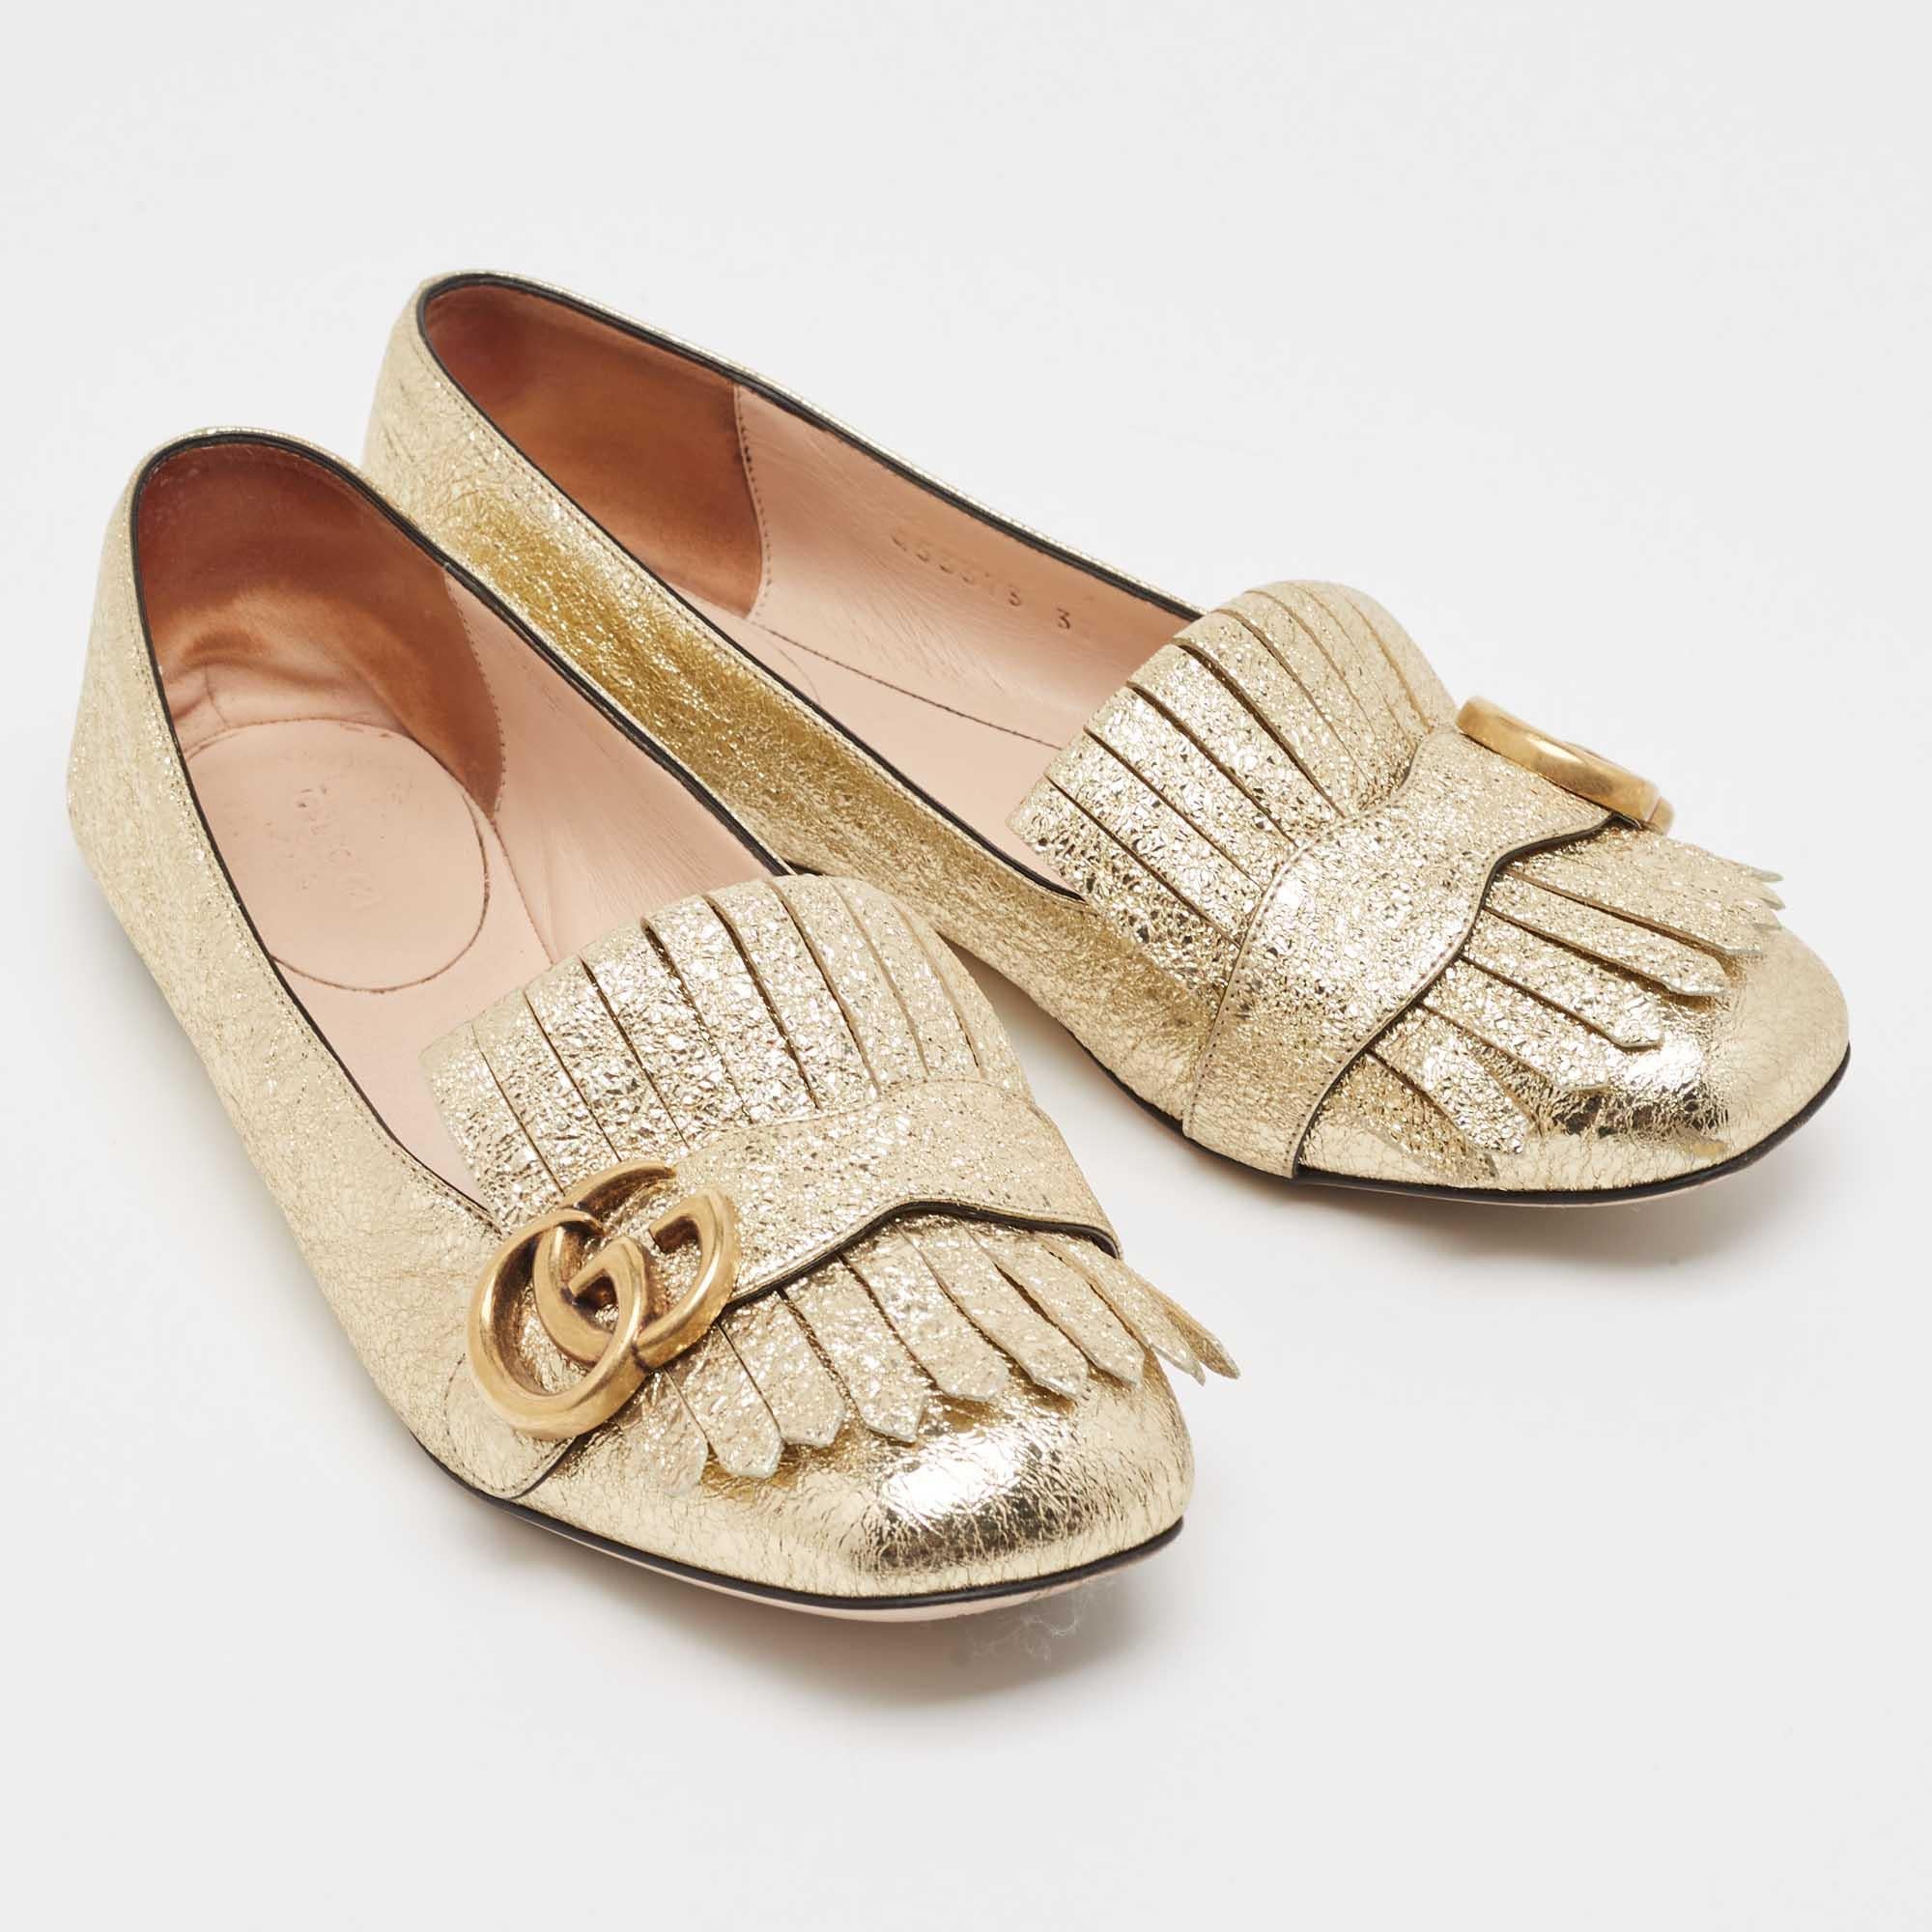 Gucci Gold Crinkled Leather GG Marmont Fringe Flats Size 37 1